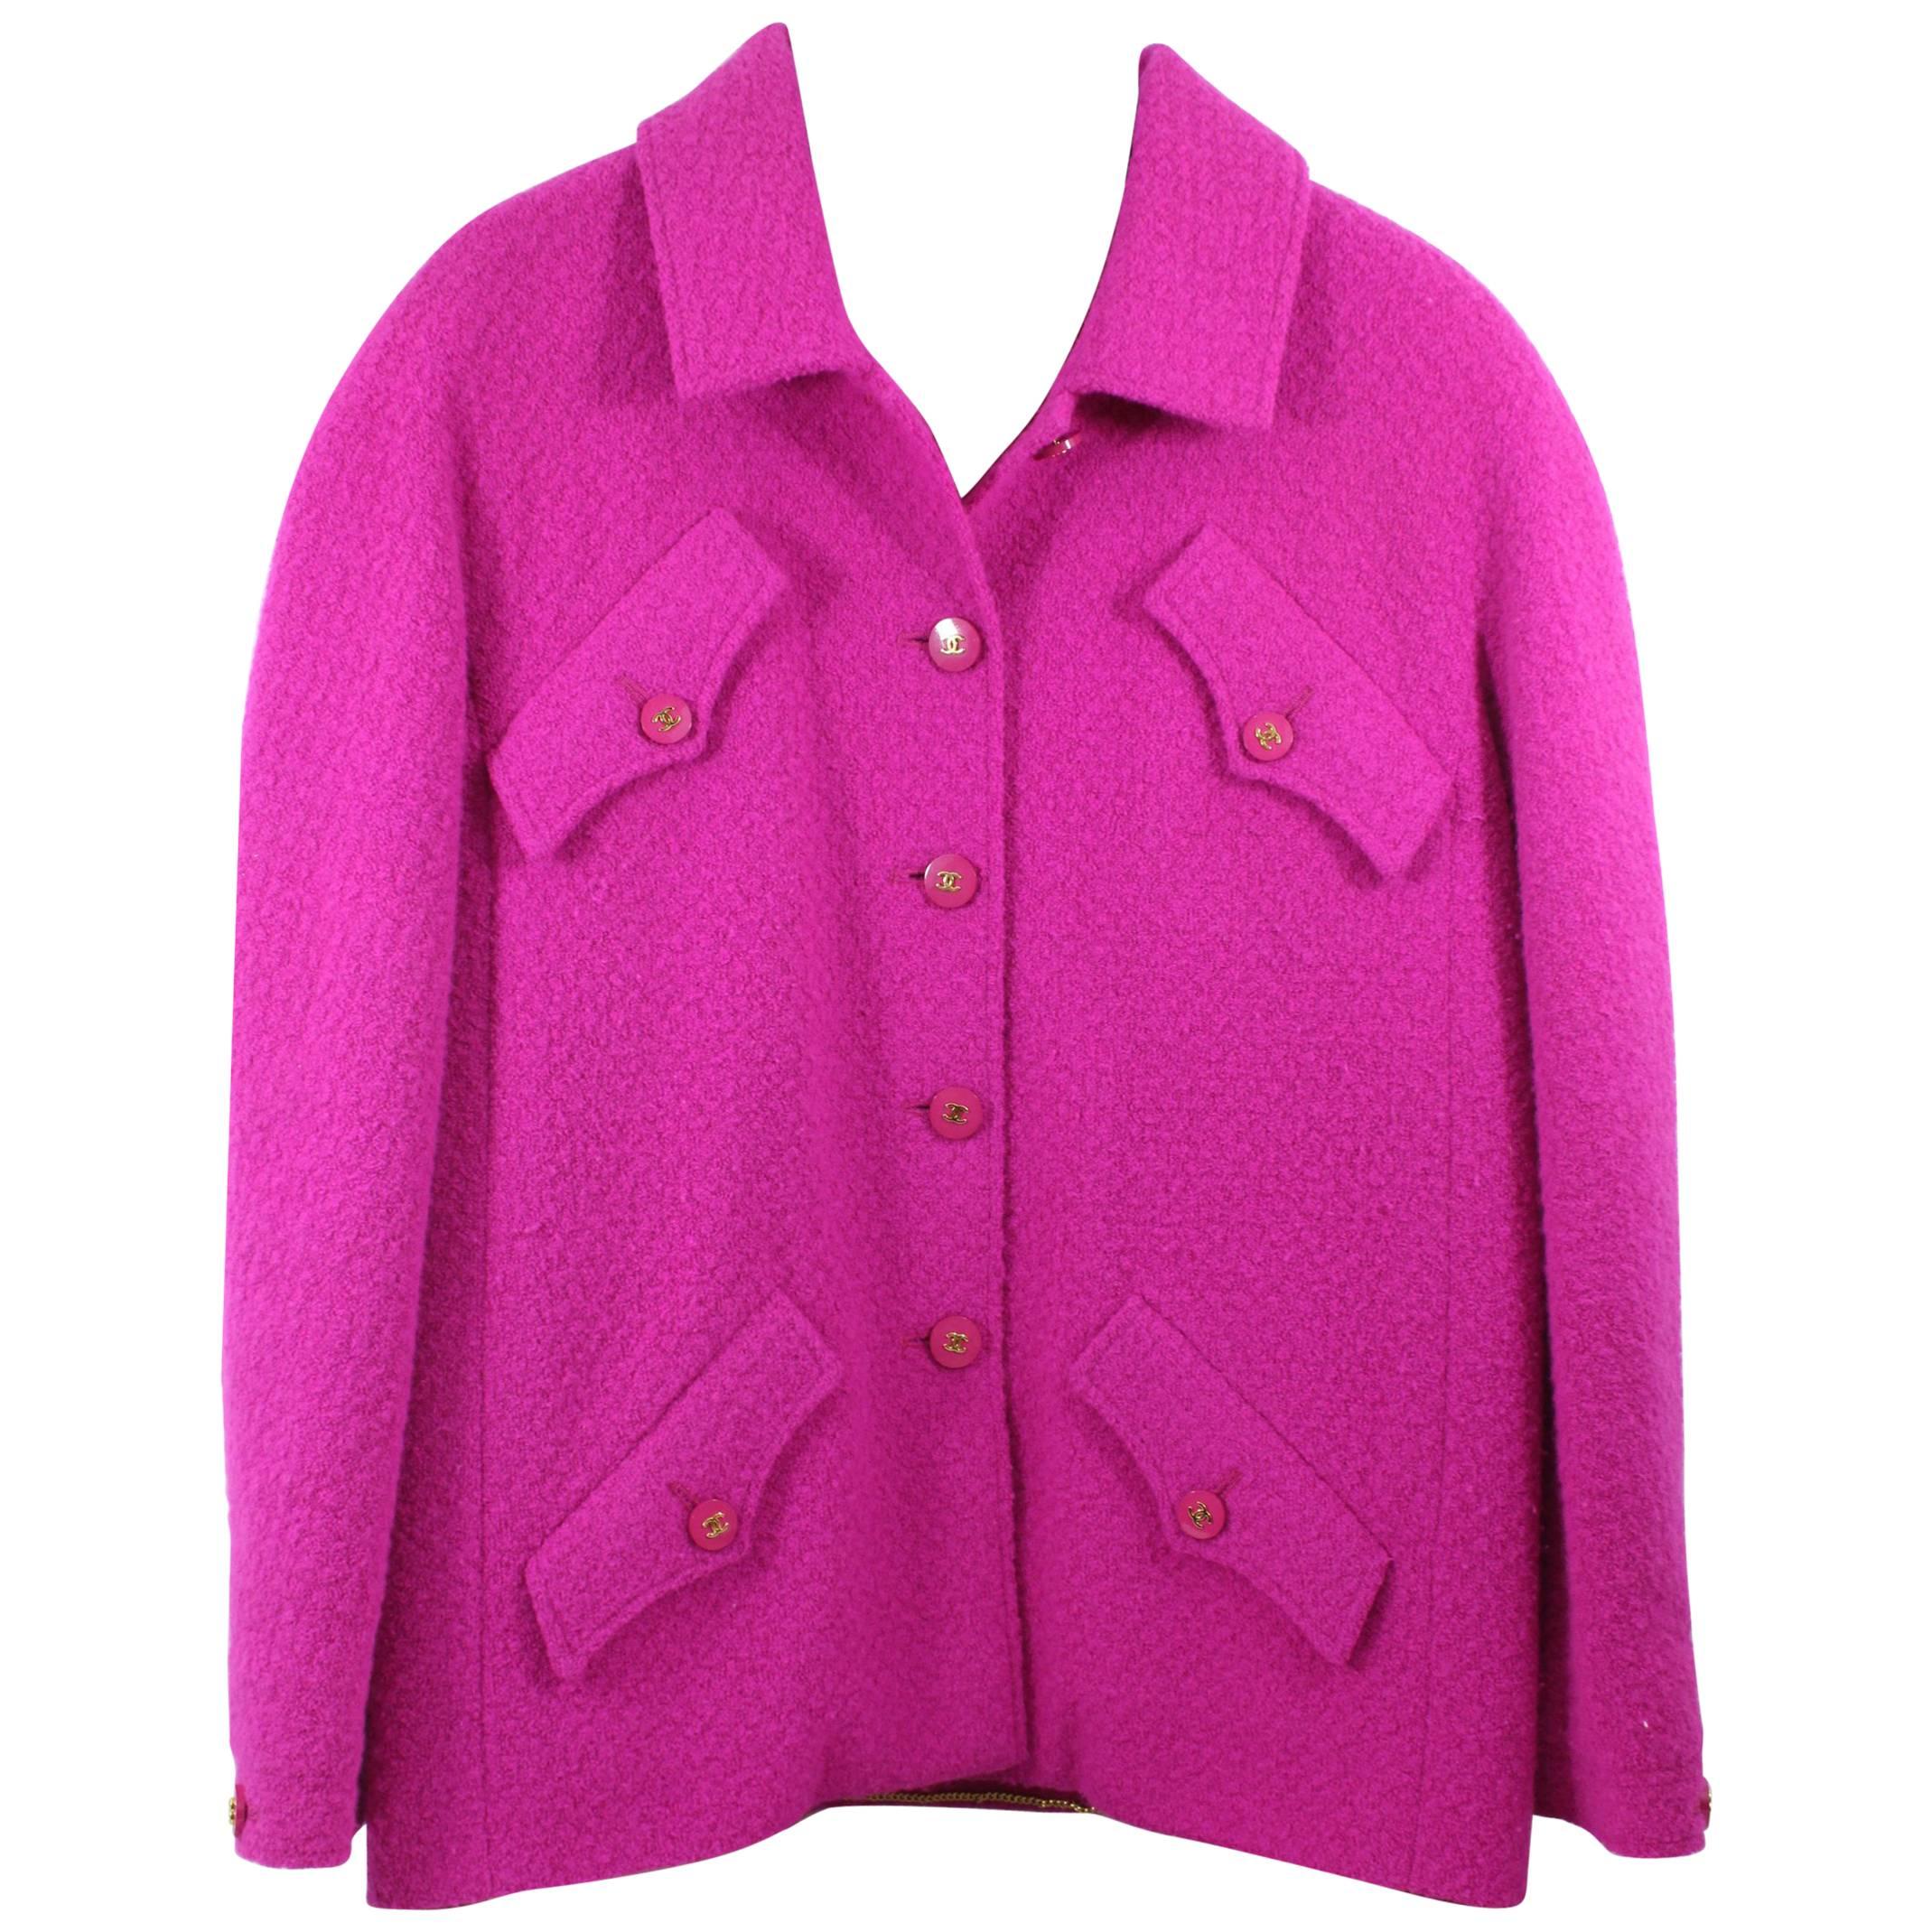 Chanel 1995 Pink Wool Jacket with Golden buttons. Size FR 40